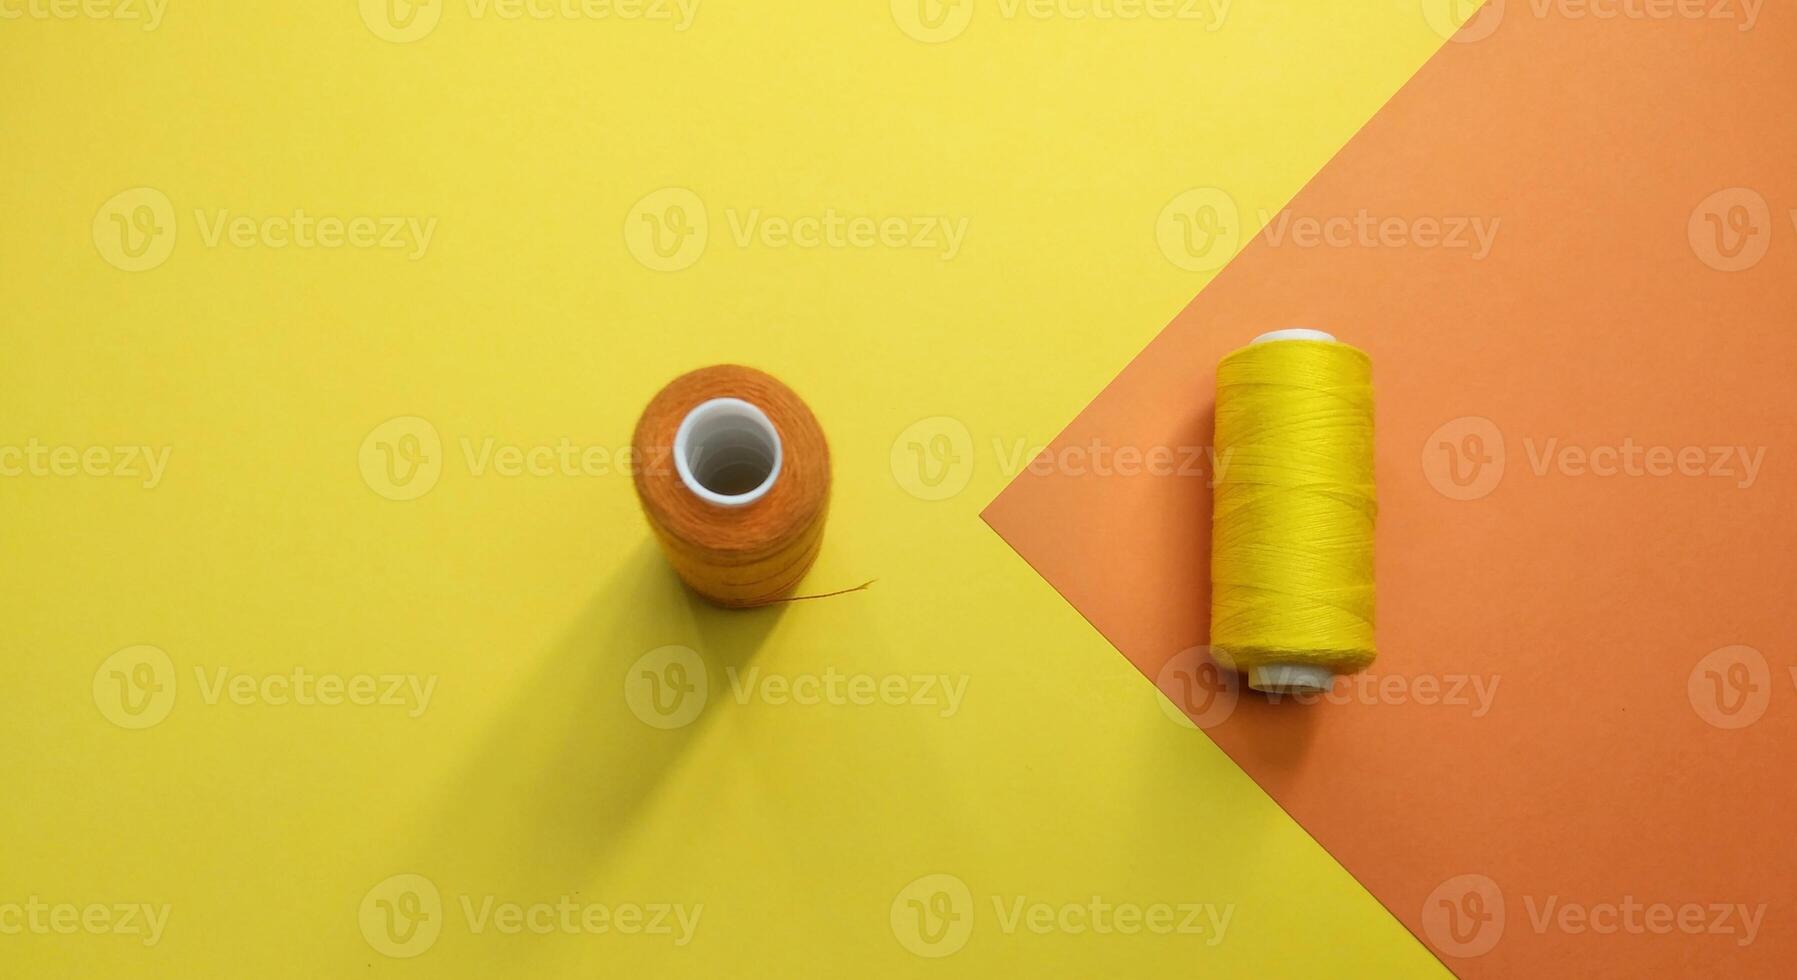 Spools of thread and a needle on a yellow and orange background, Contrast consept photo